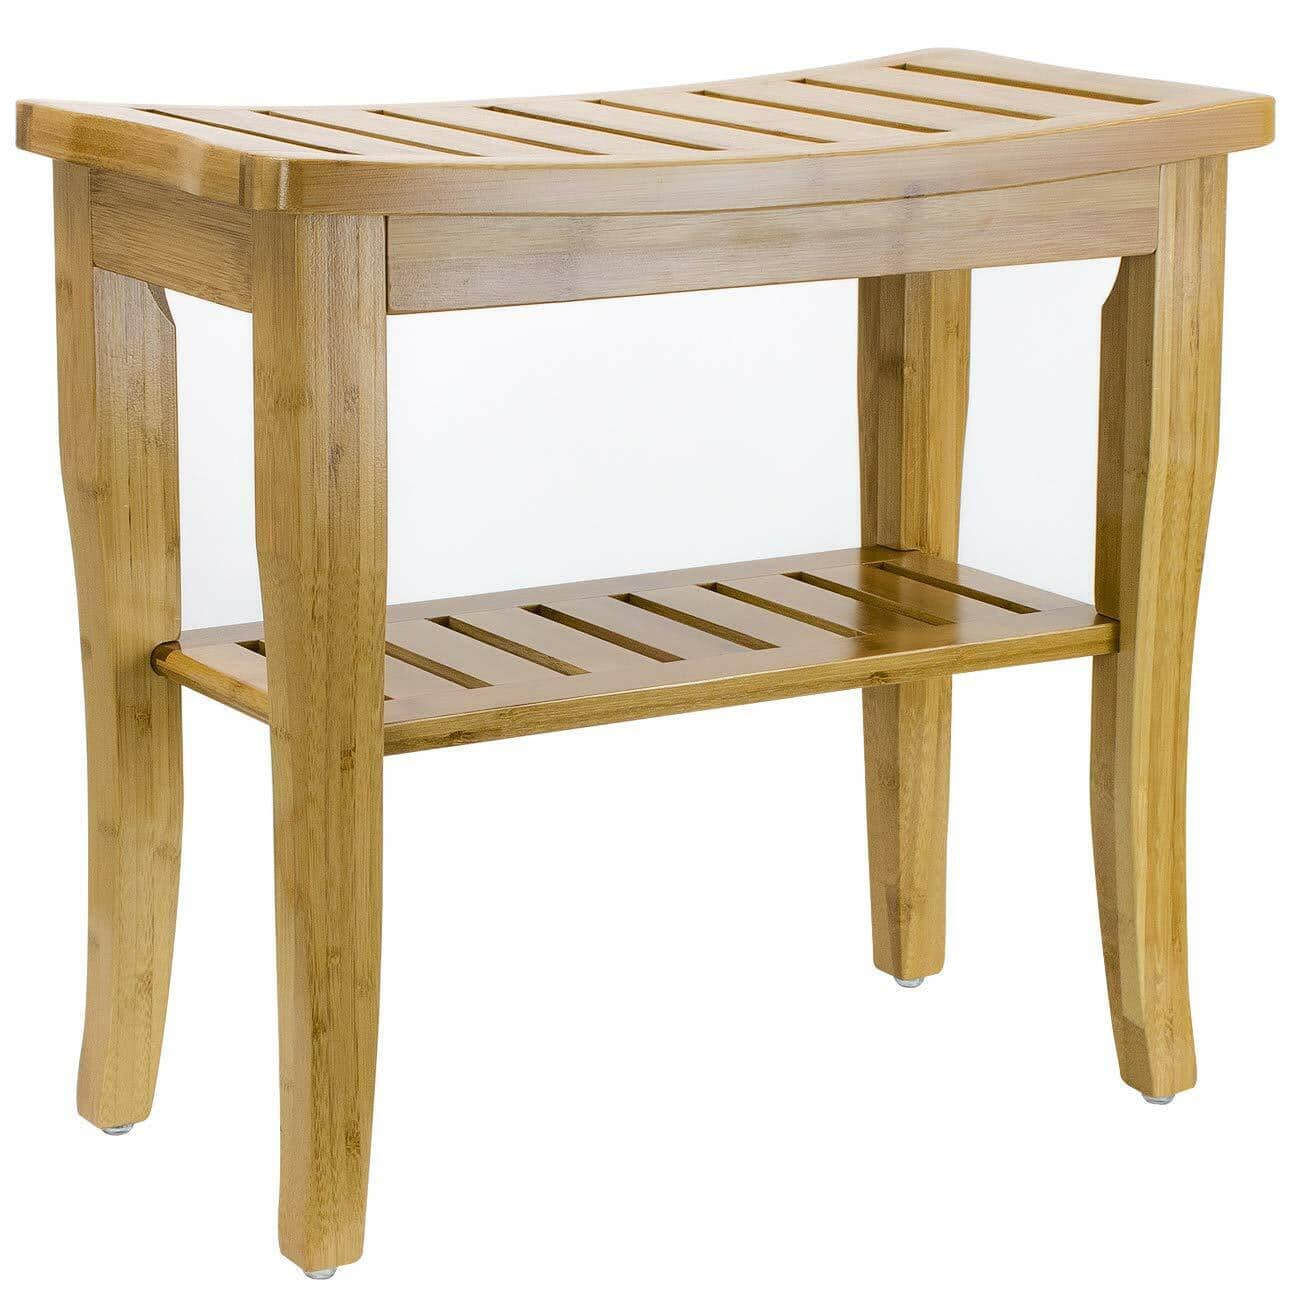 A wooden shower bench with a shelf on it.